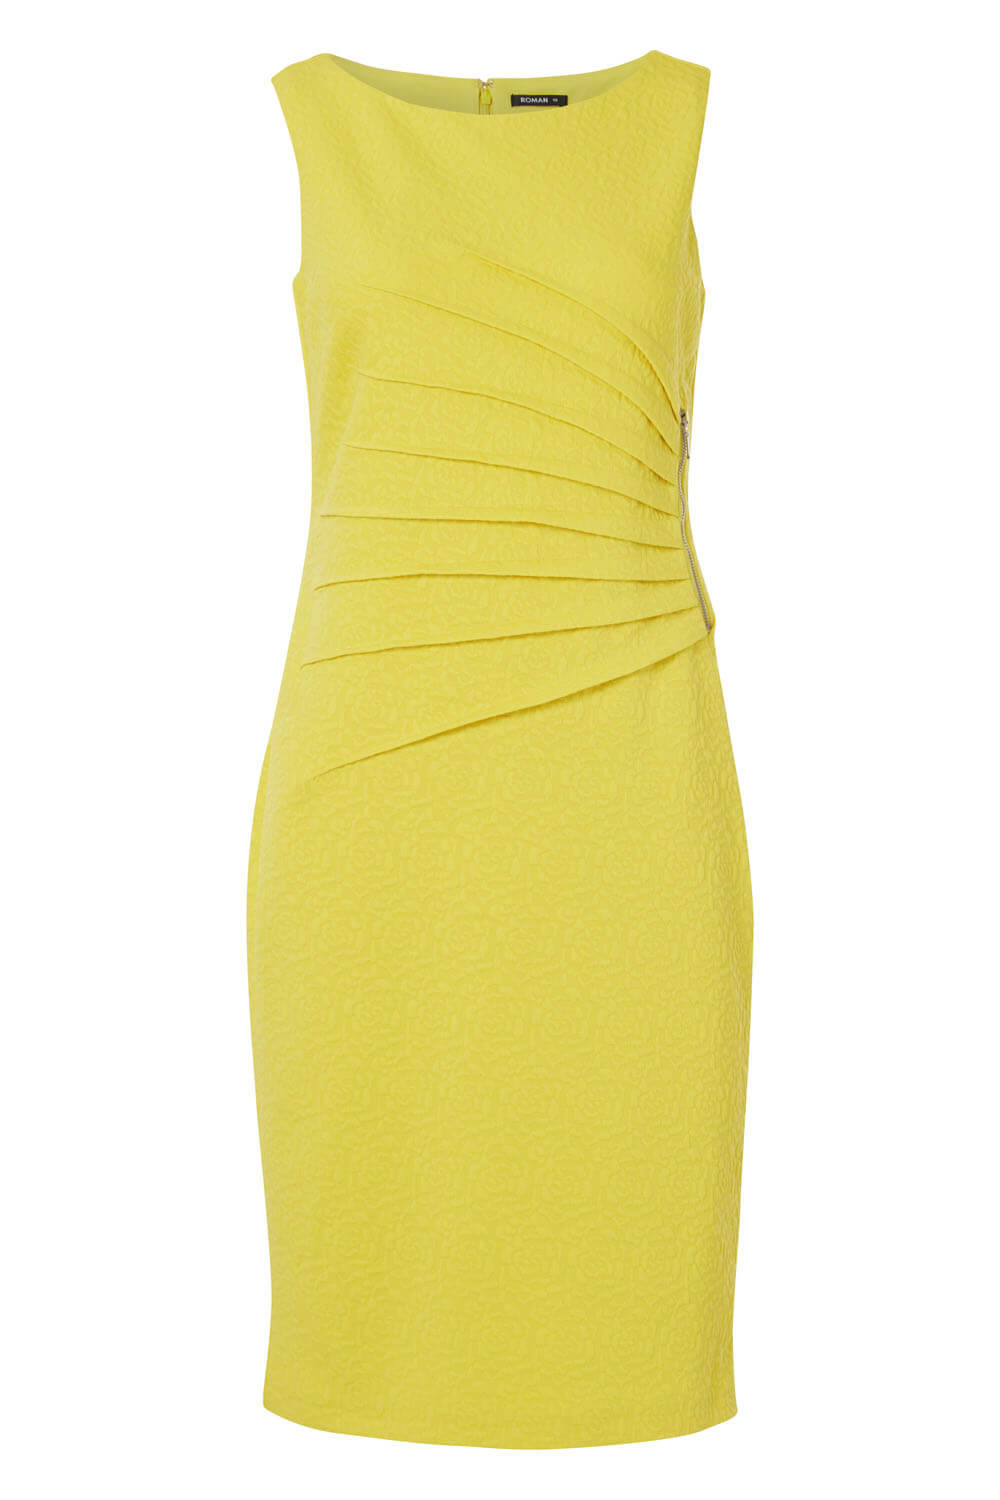 Lime Textured Zip Detail Dress , Image 5 of 5